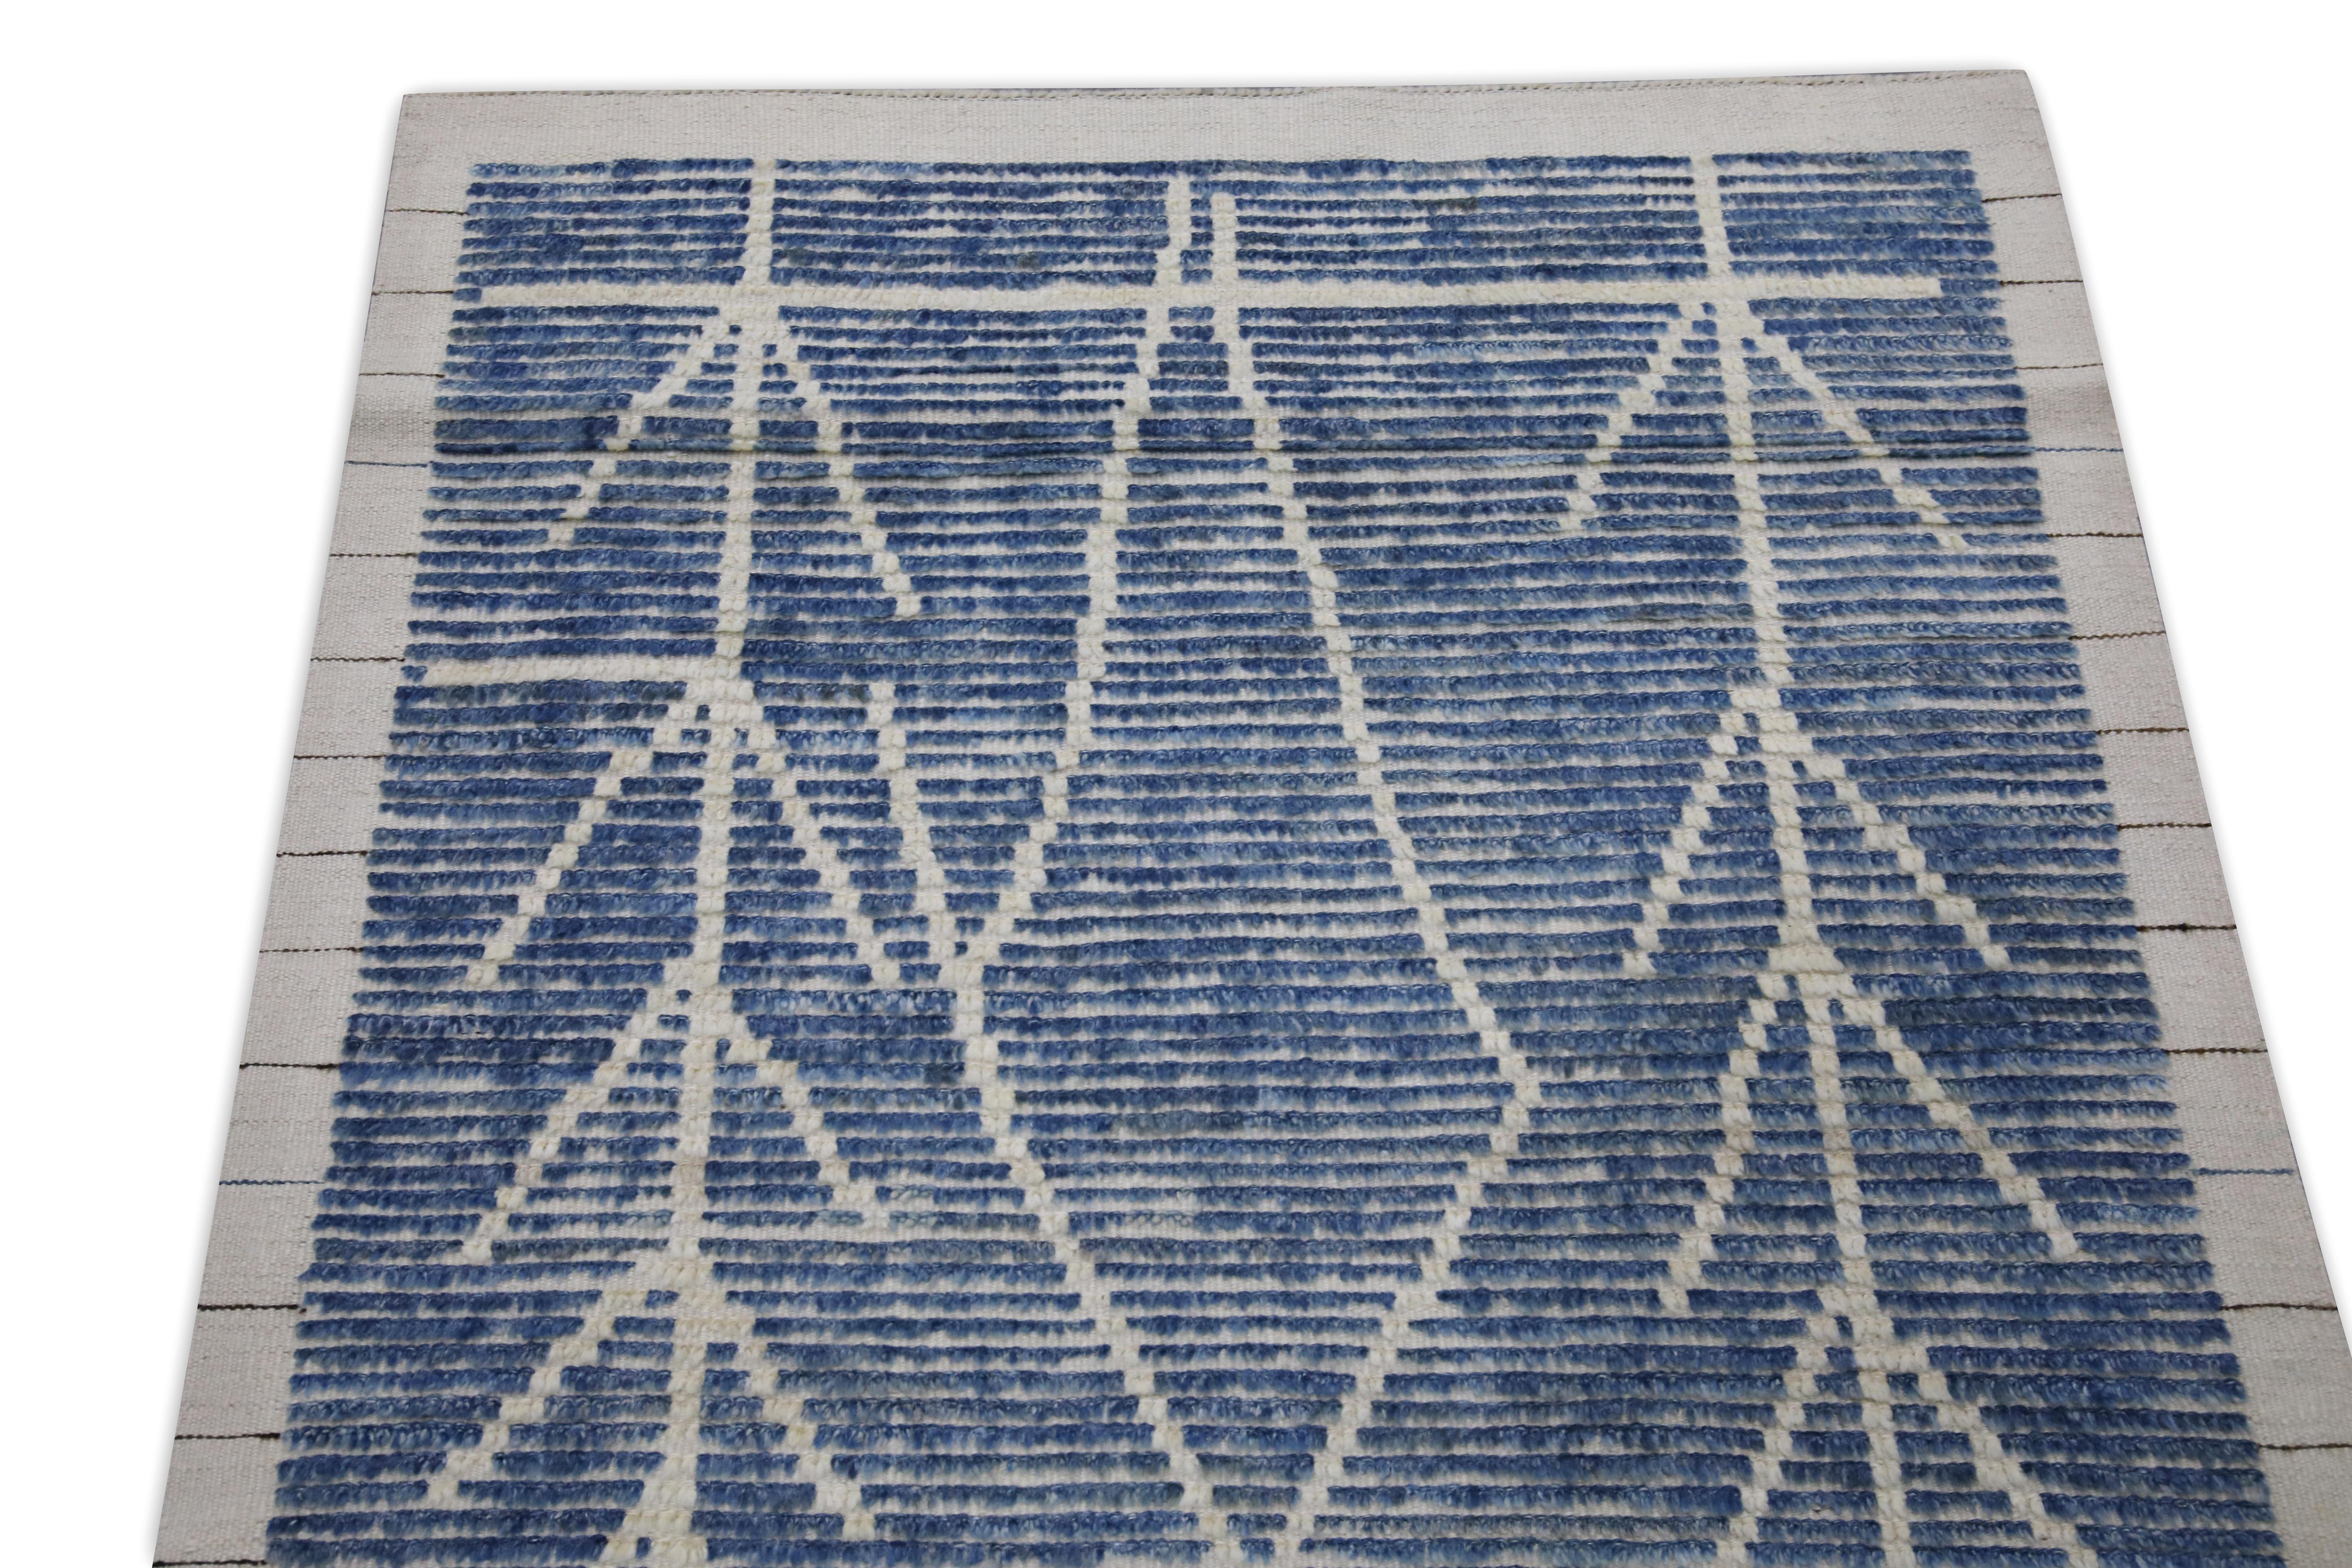 Vegetable Dyed Blue 21st Century Modern Moroccan Style Wool Runner 3' X 8'4